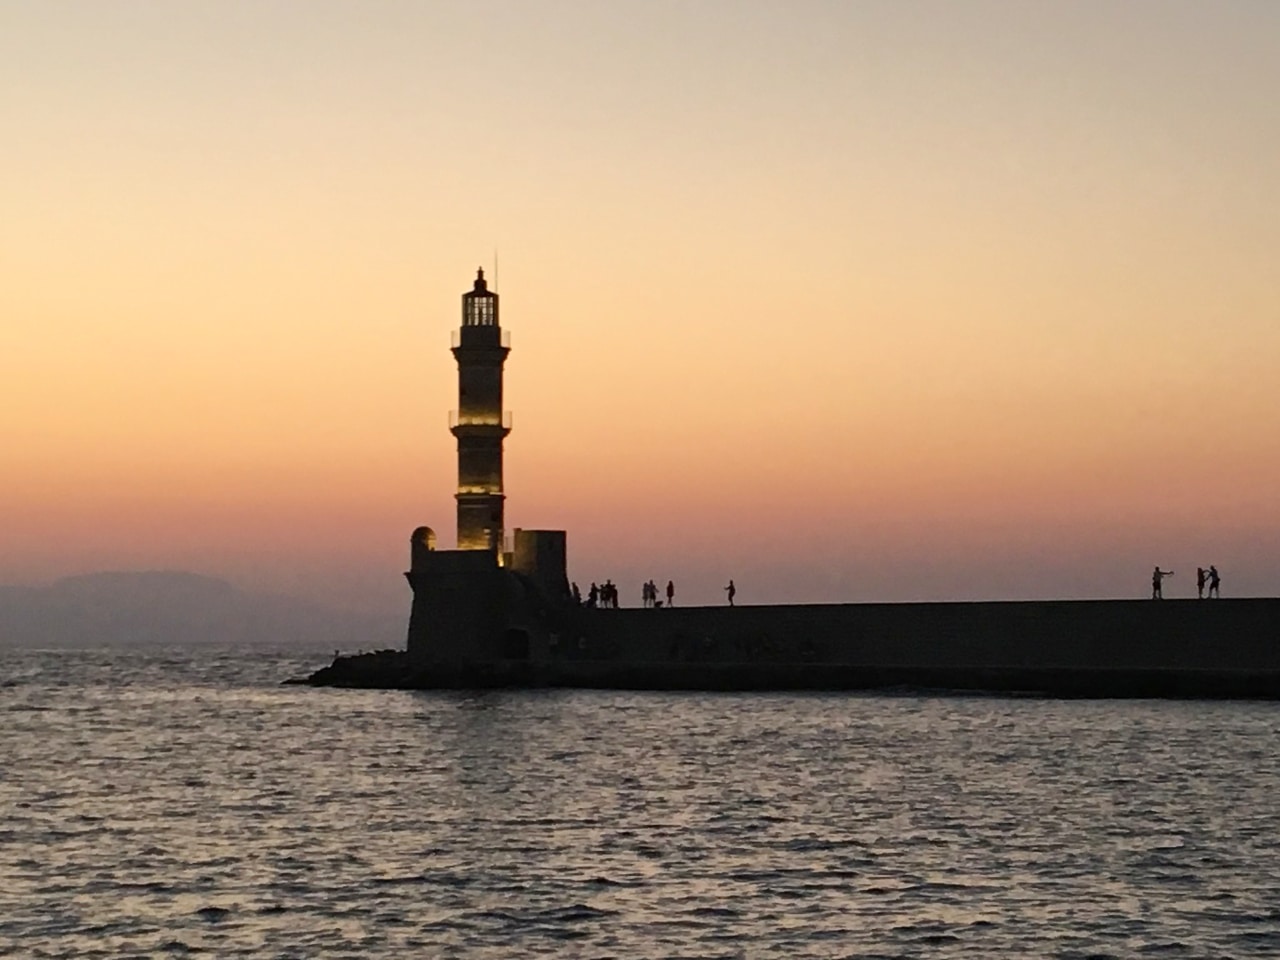 summer festival chania crete, summer music festival events chania, things to do chania crete, theatre art music chania,  theatrical nights, visual arts exhibitions, concerts with well known artists, nights with traditional music and dance groups